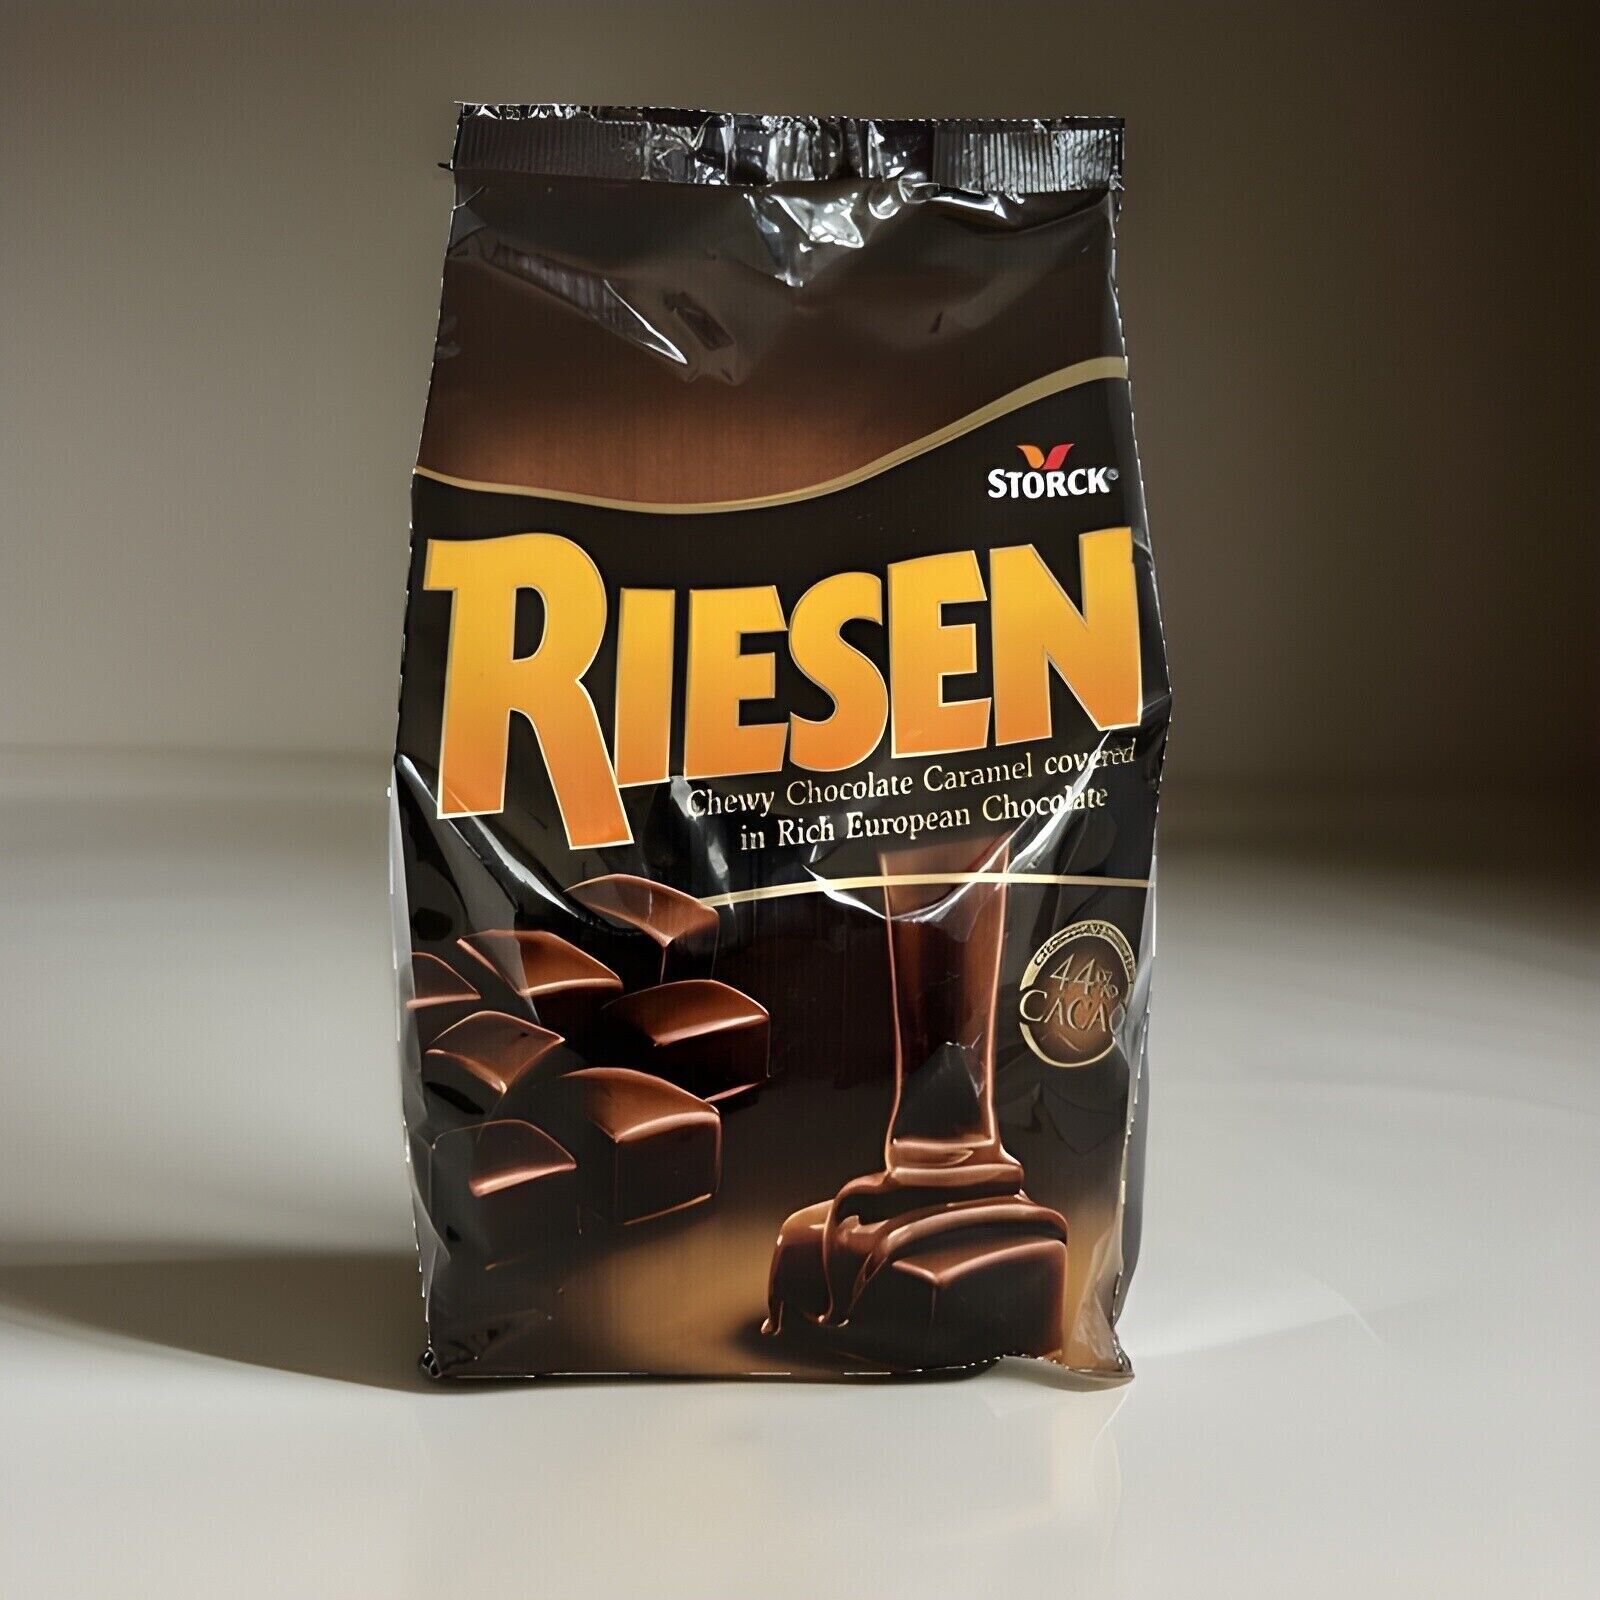 Riesen European Chocolate Covered Chewy Caramel Candy 30oz. bag